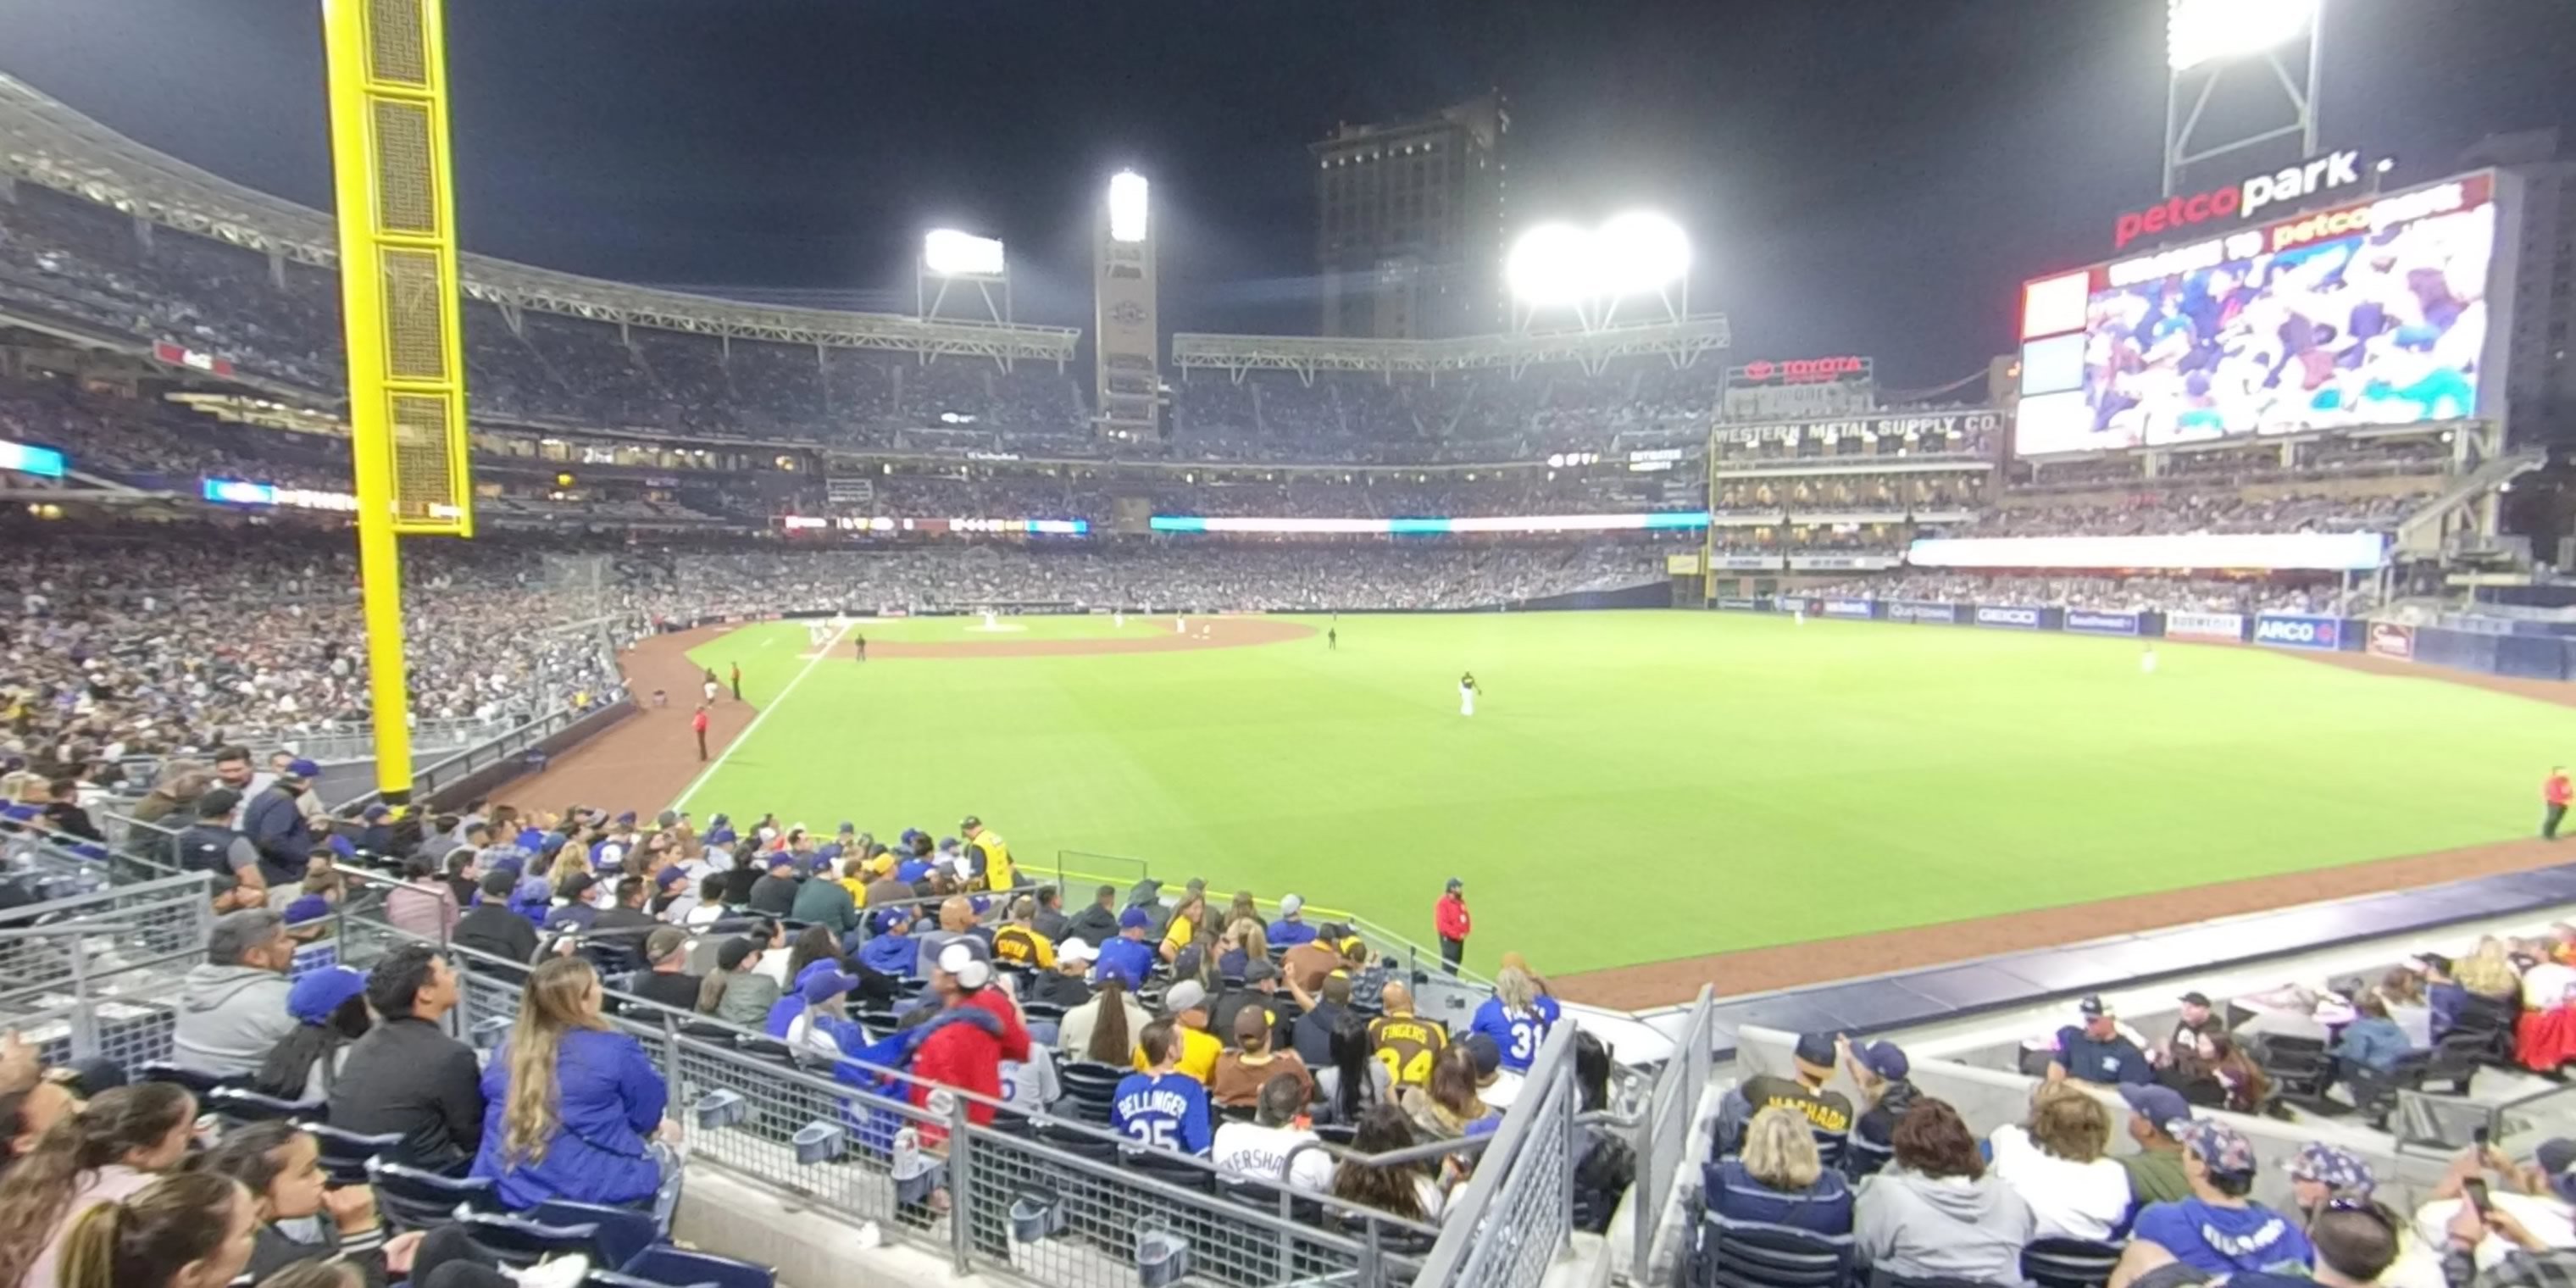 section 127 panoramic seat view  for baseball - petco park